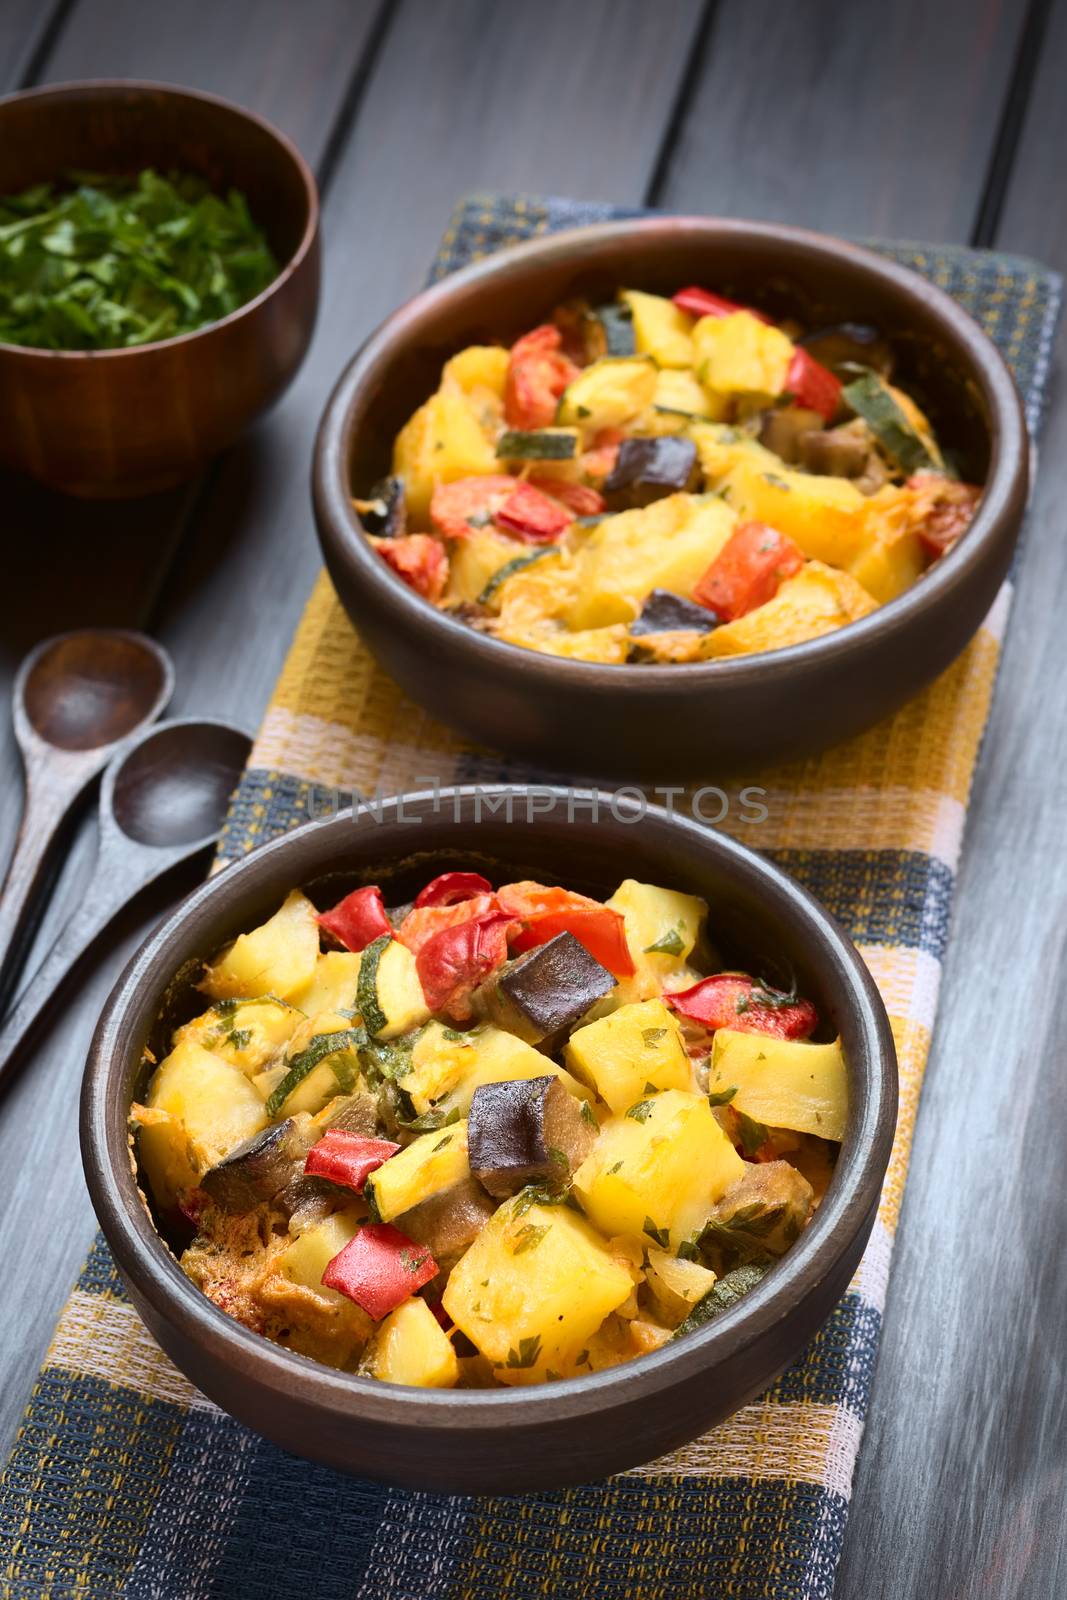 Baked potato, eggplant, zucchini and tomato casserole in rustic bowls, photographed on dark wood with natural light (Selective Focus, Focus in the middle of the first dish)